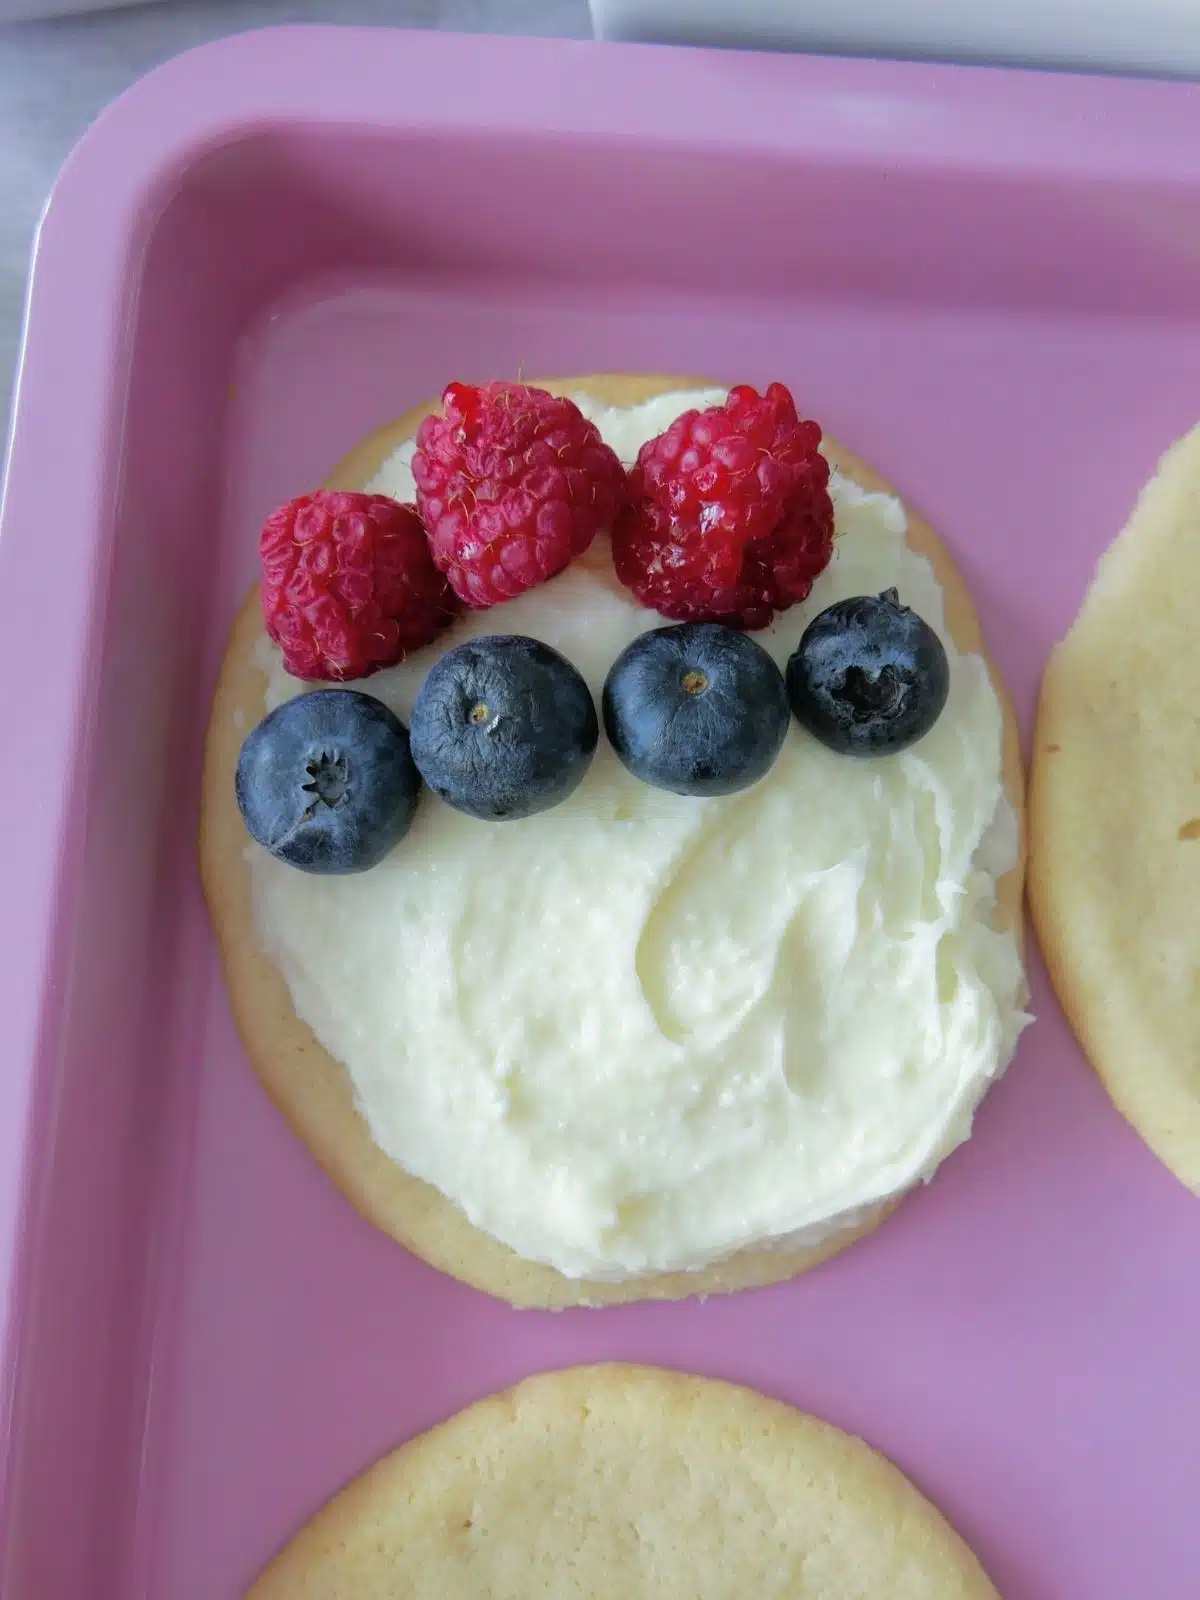 egg shaped cookie with frosting, blueberries and raspberries.